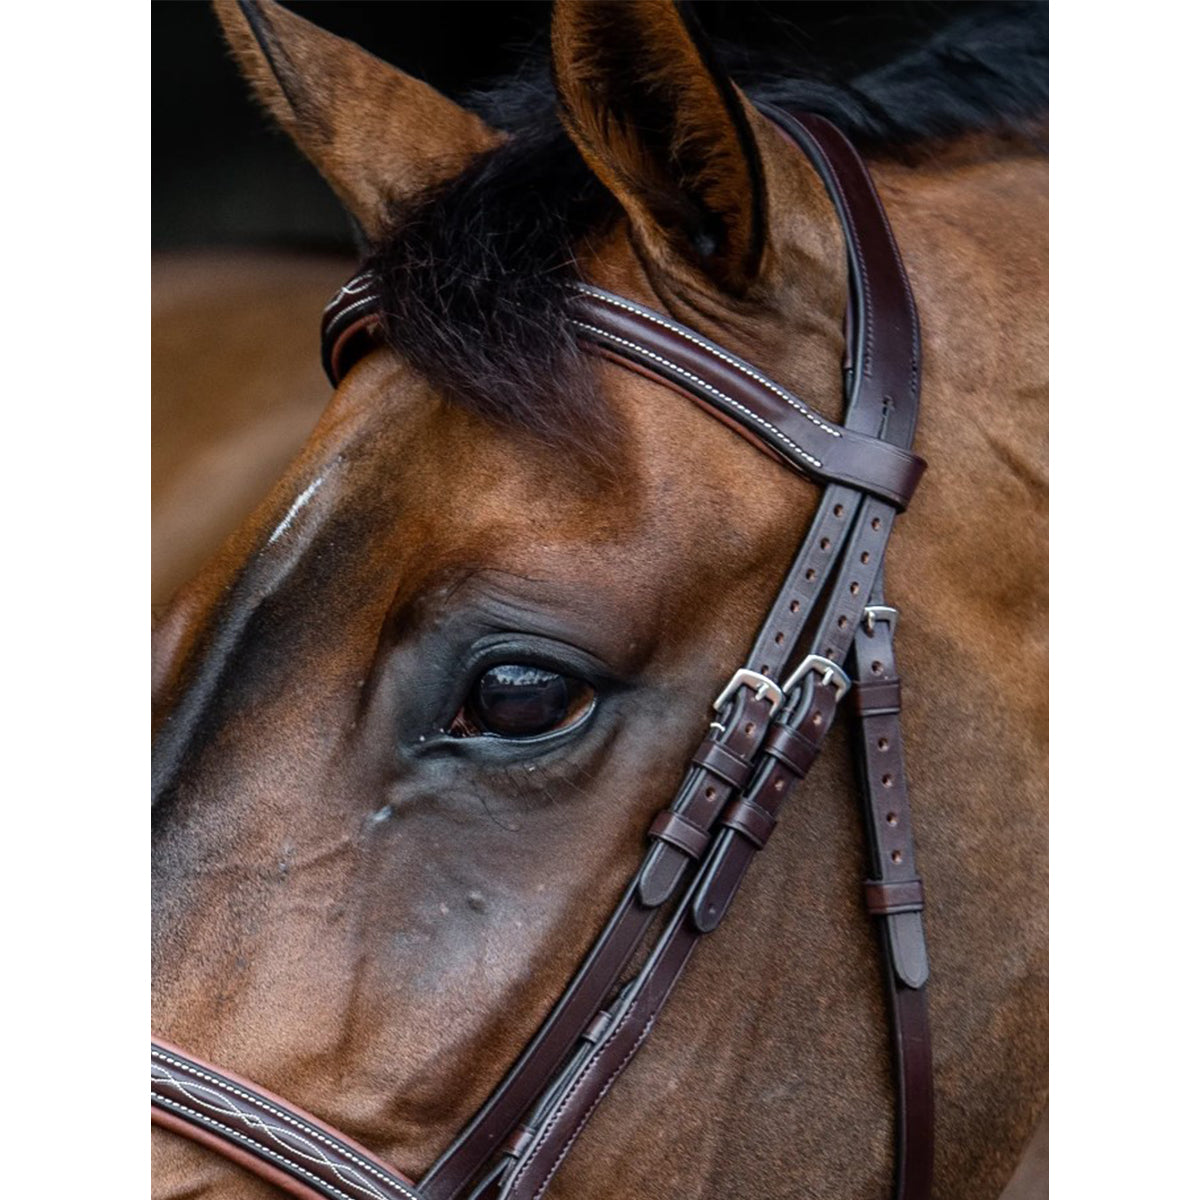 Equiline Classic Headpiece